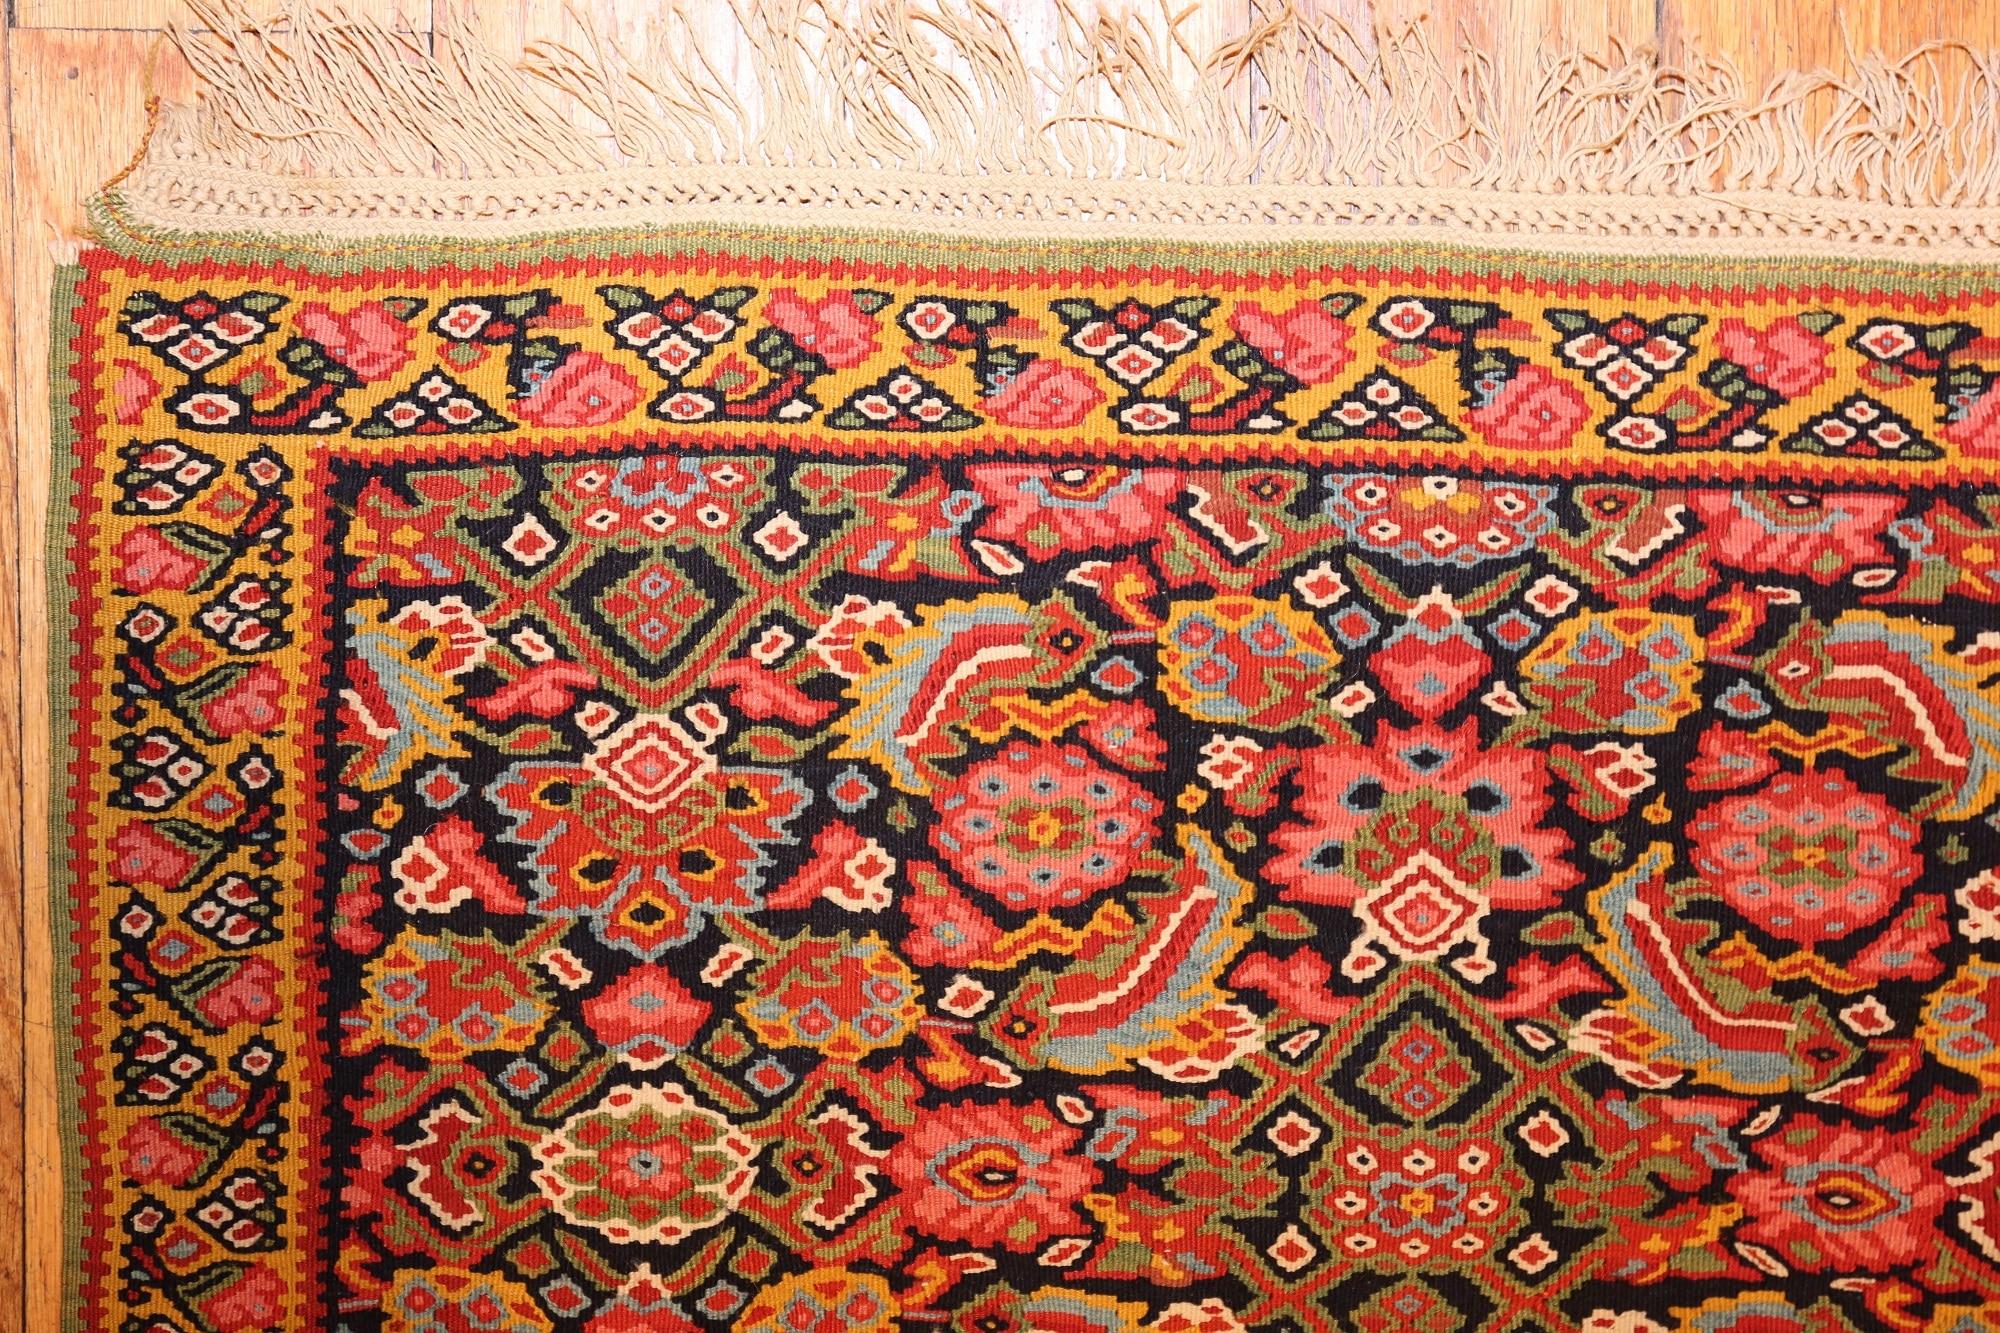 20th Century Small Fine Antique Persian Senneh Kilim Rug. Size: 3 ft x 4 ft (0.91 m x 1.22 m)